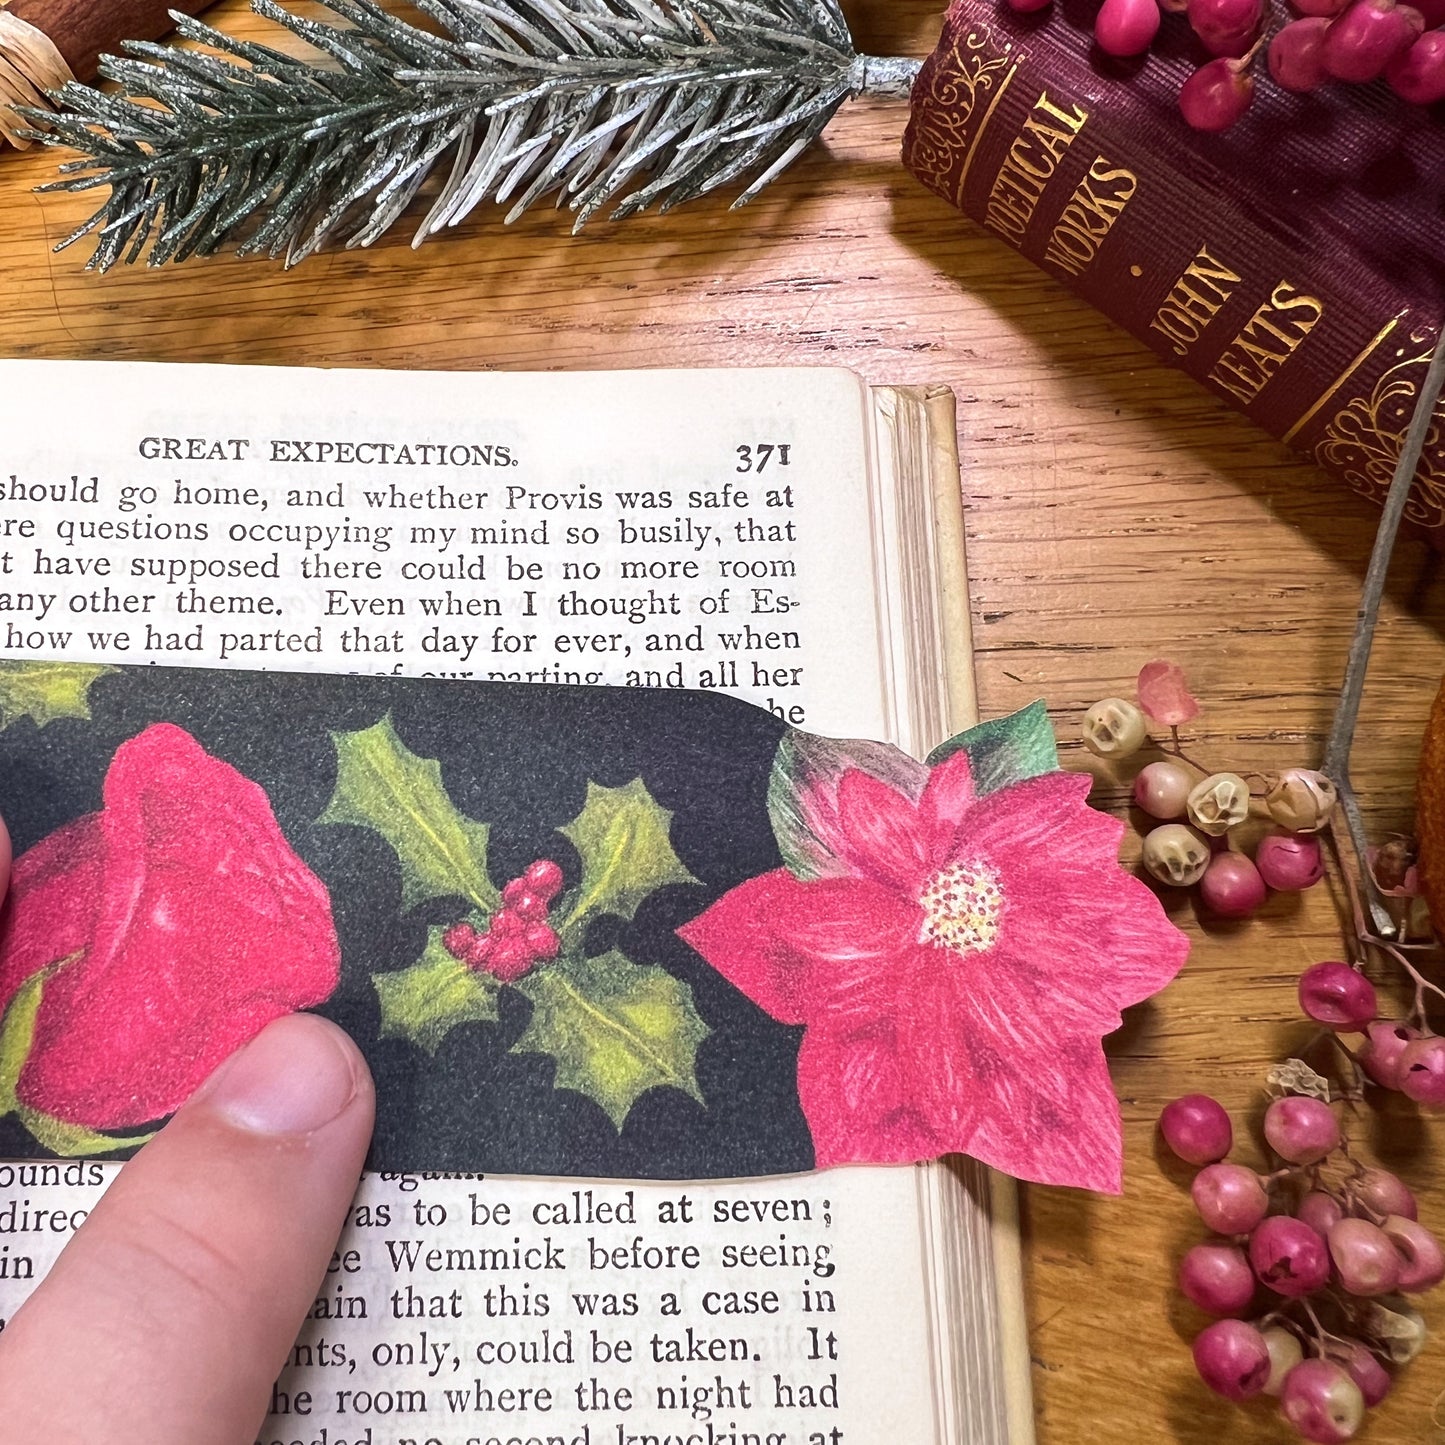 Winters bloom bookmark close up used in book. Bookmark has been cut out at the top to the shape of Red poinsettia